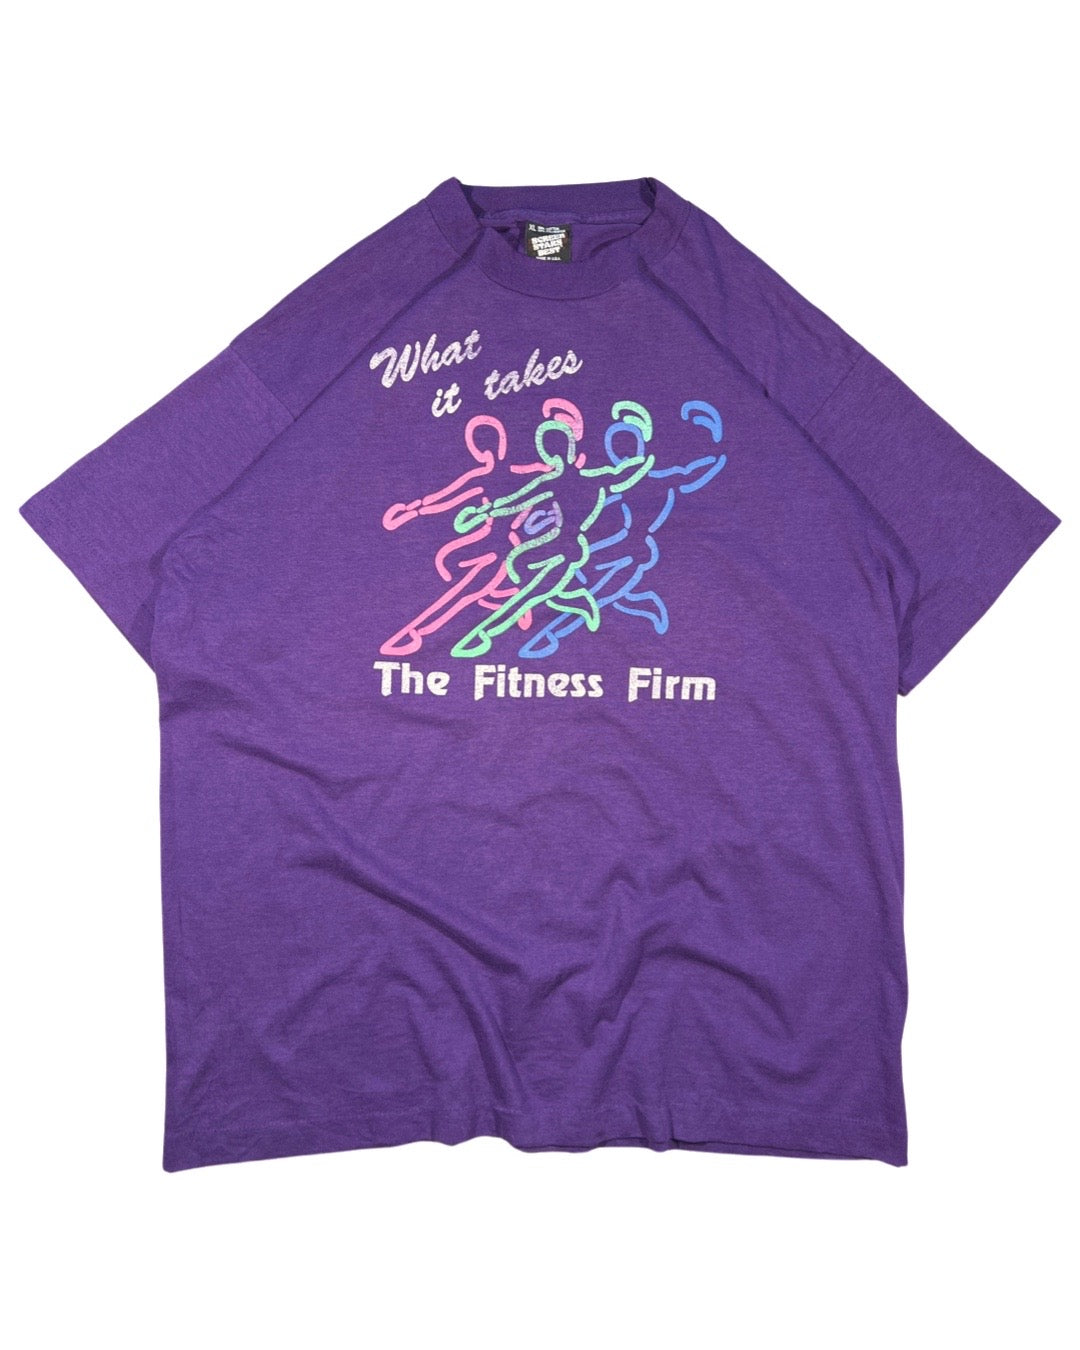 Vintage Fitness Firm Tee - XL